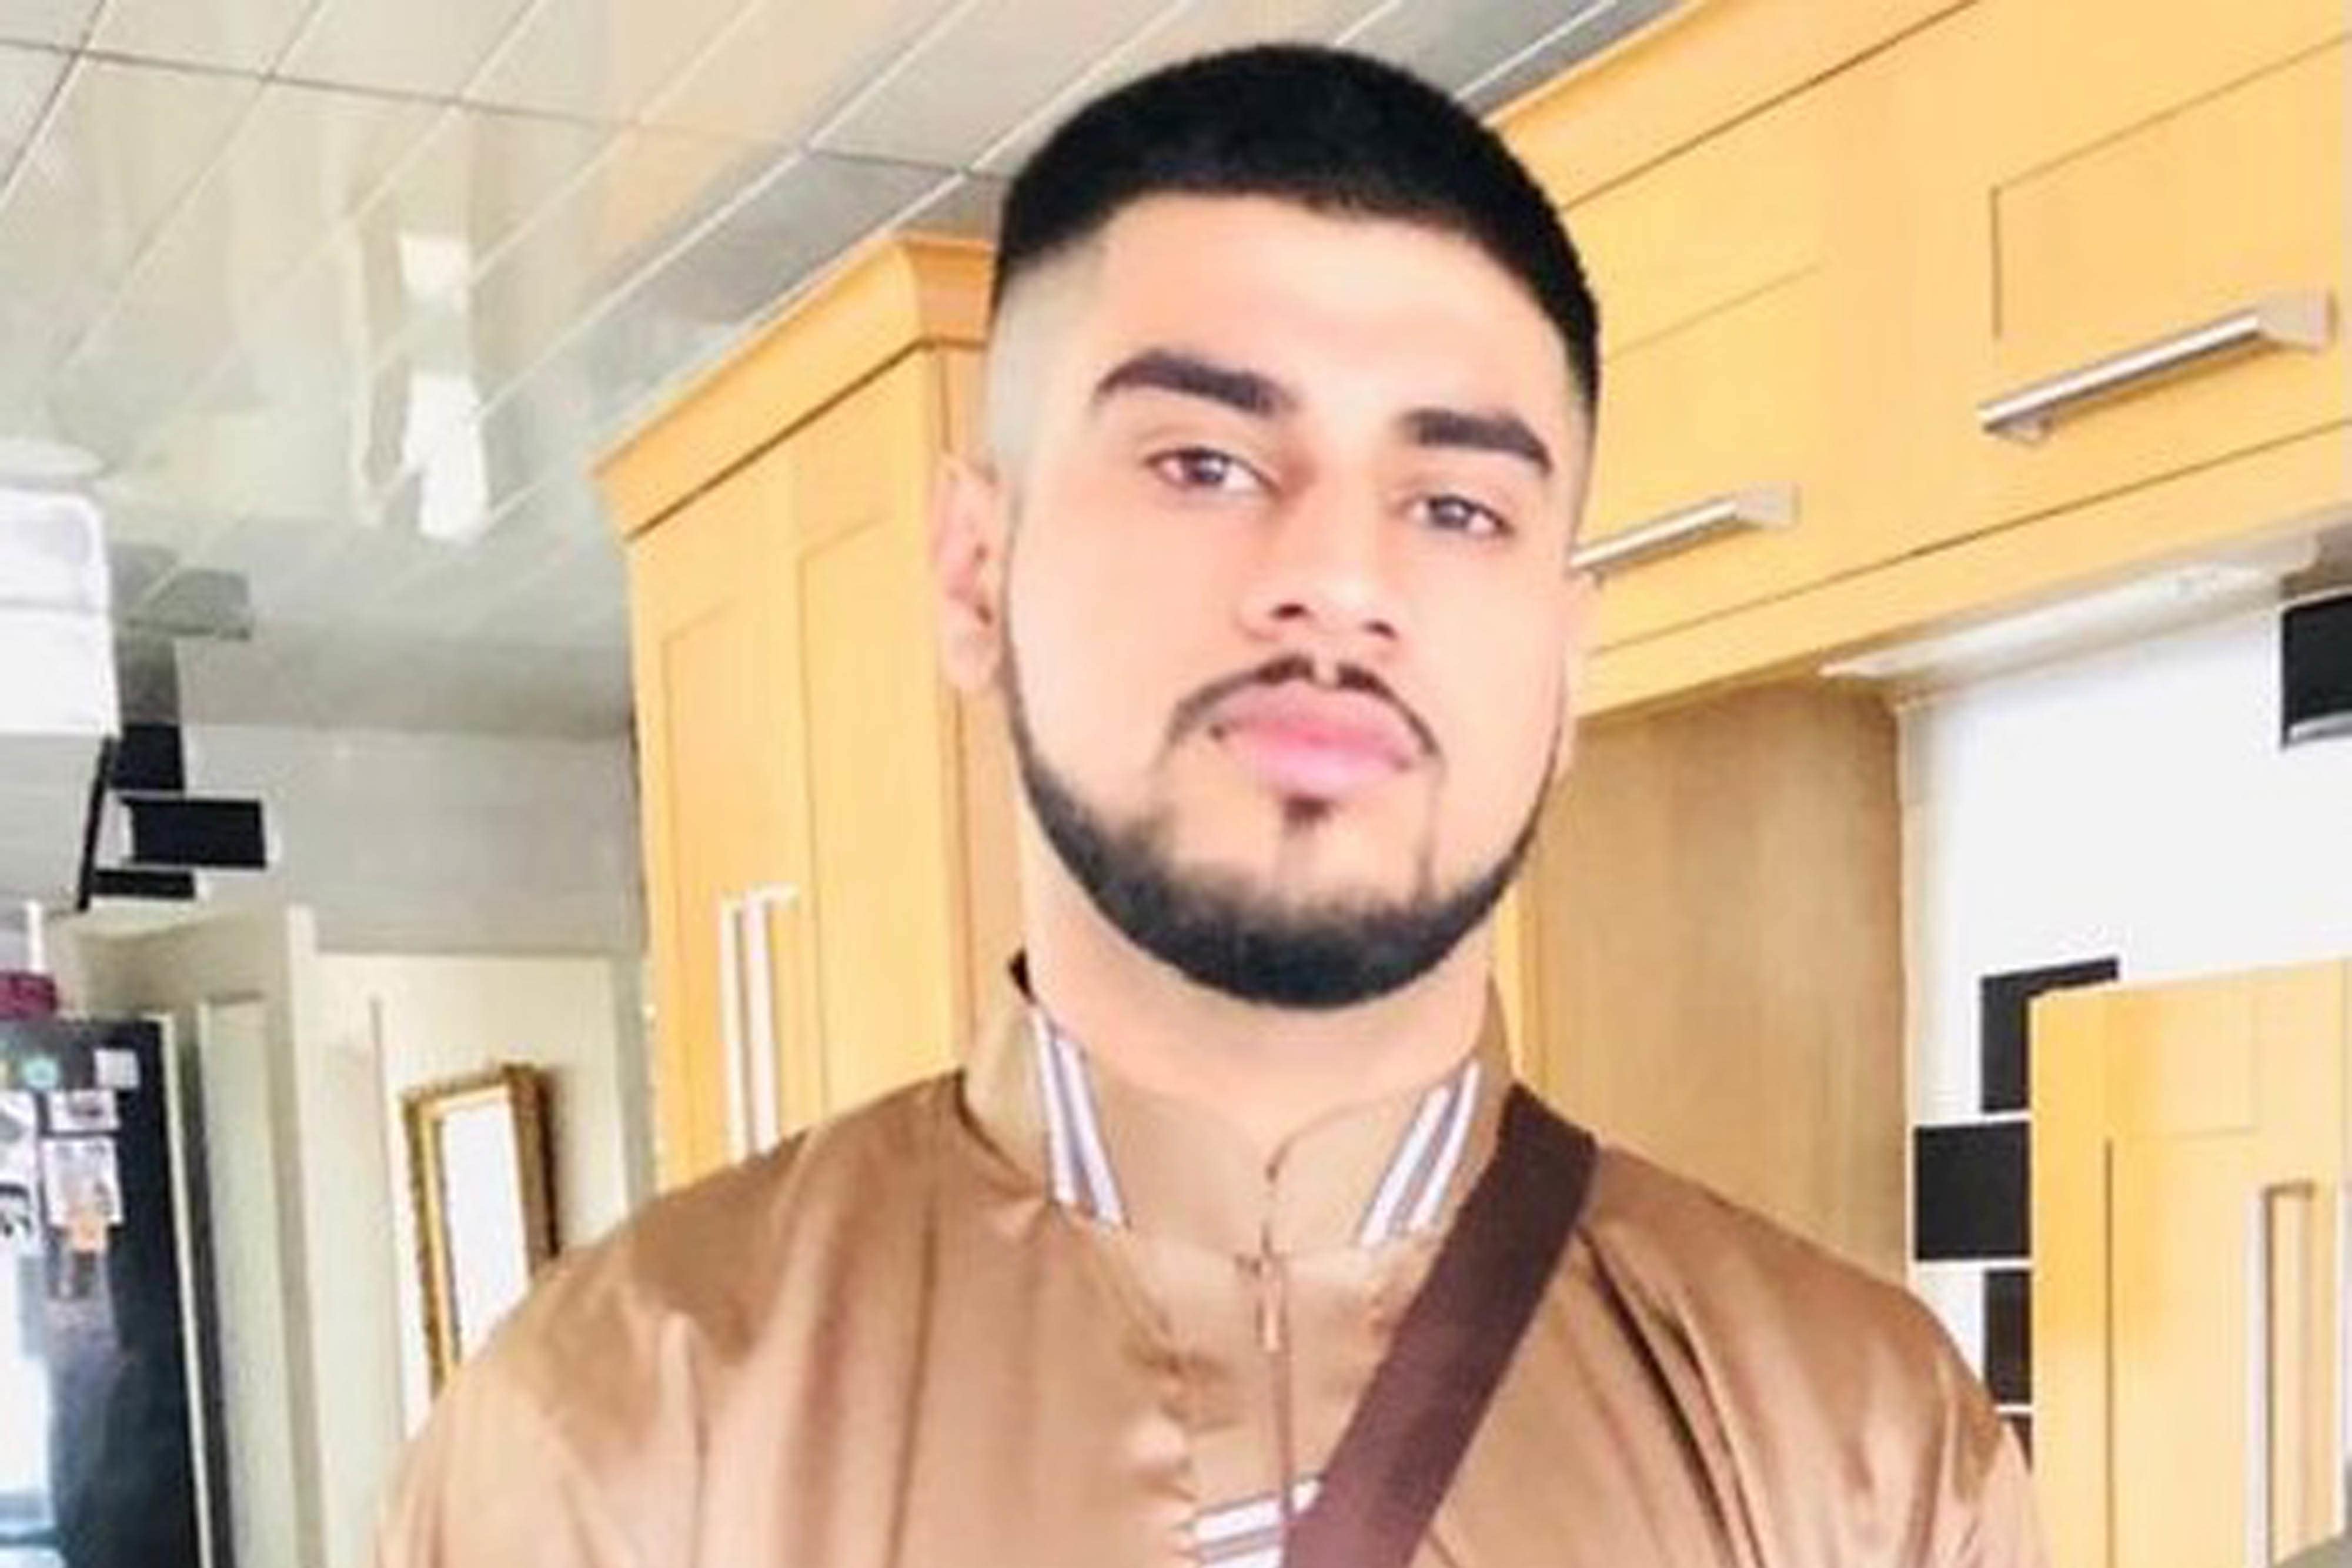 Saqib Hussain, who along with his friend, Mohammed Hashim Ijazuddin, died in a crash in February